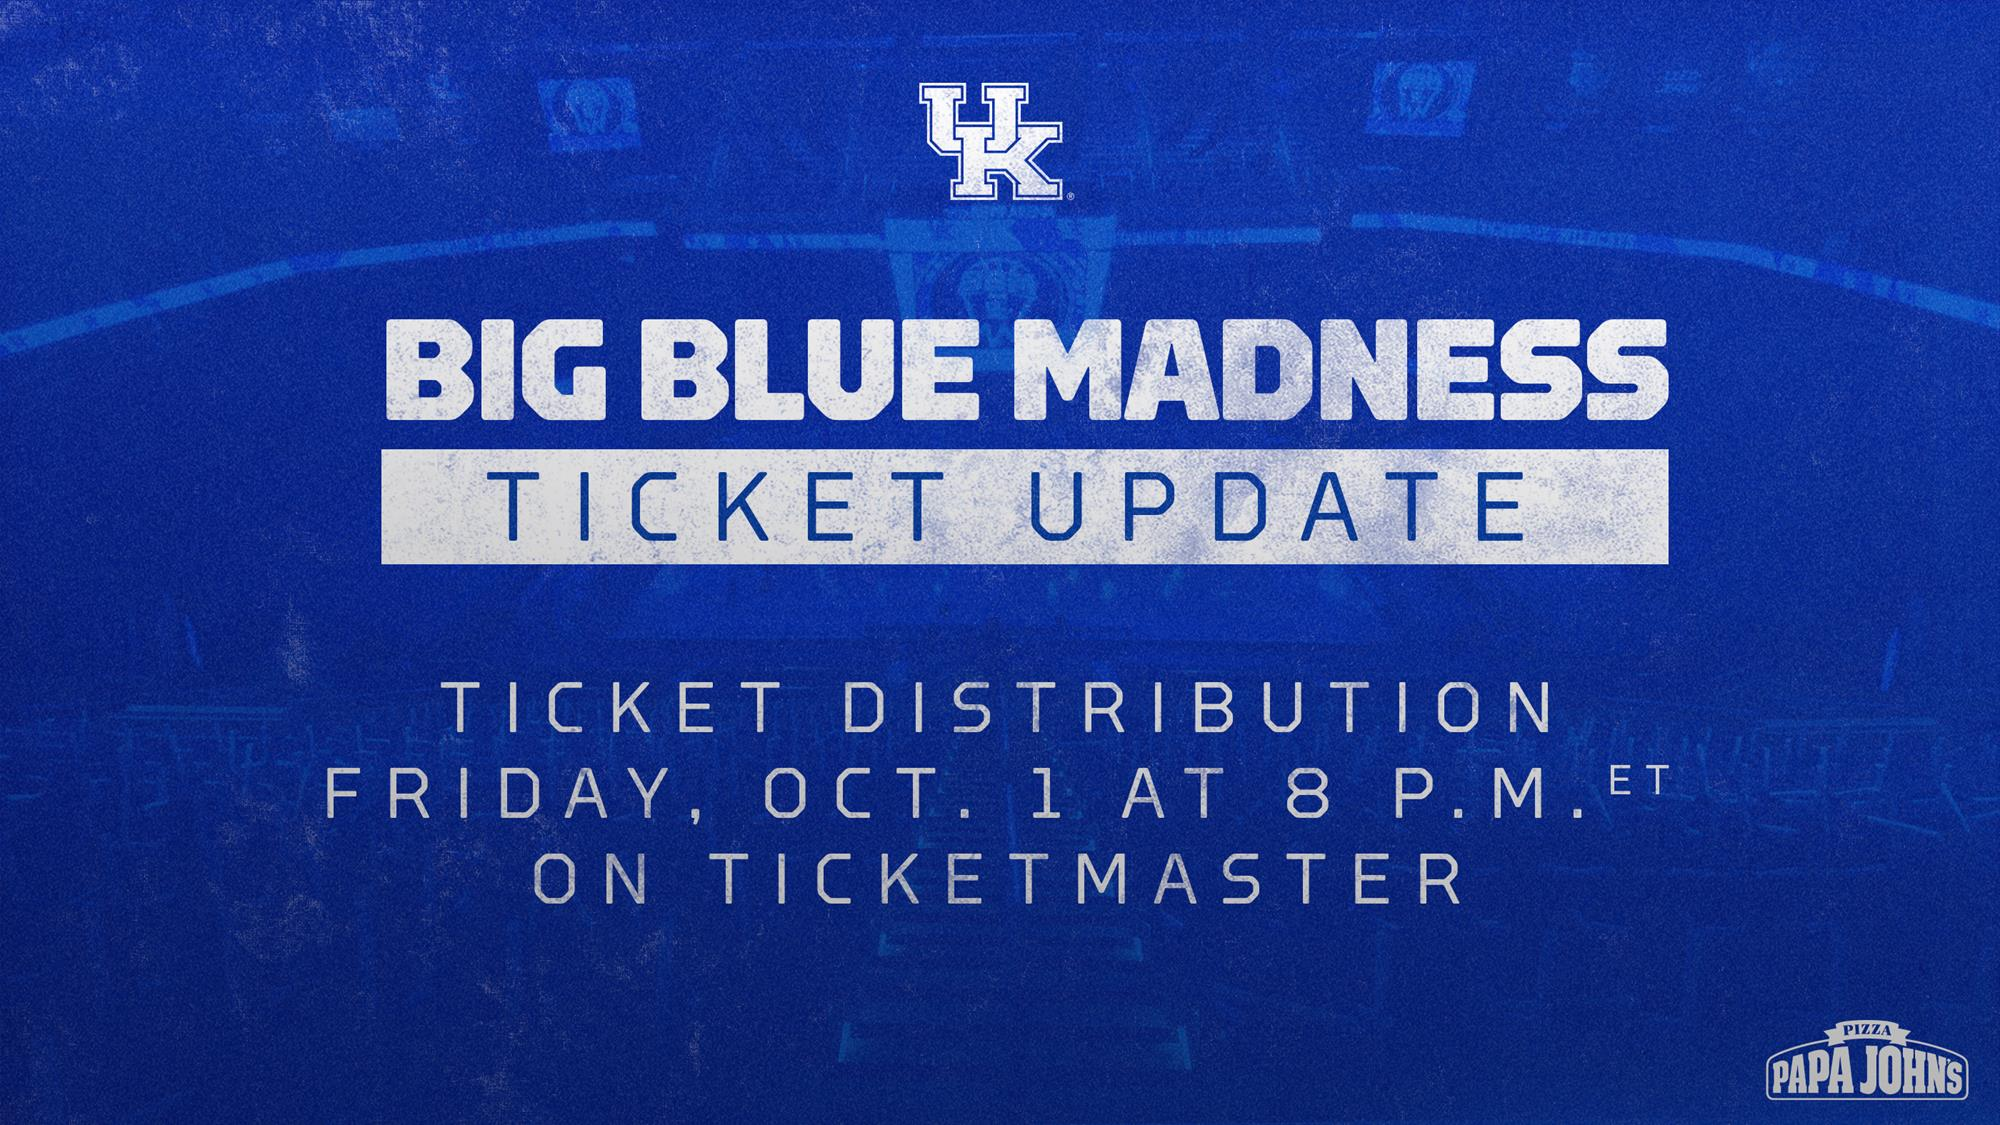 Big Blue Madness Tickets to Be Distributed Online on Friday